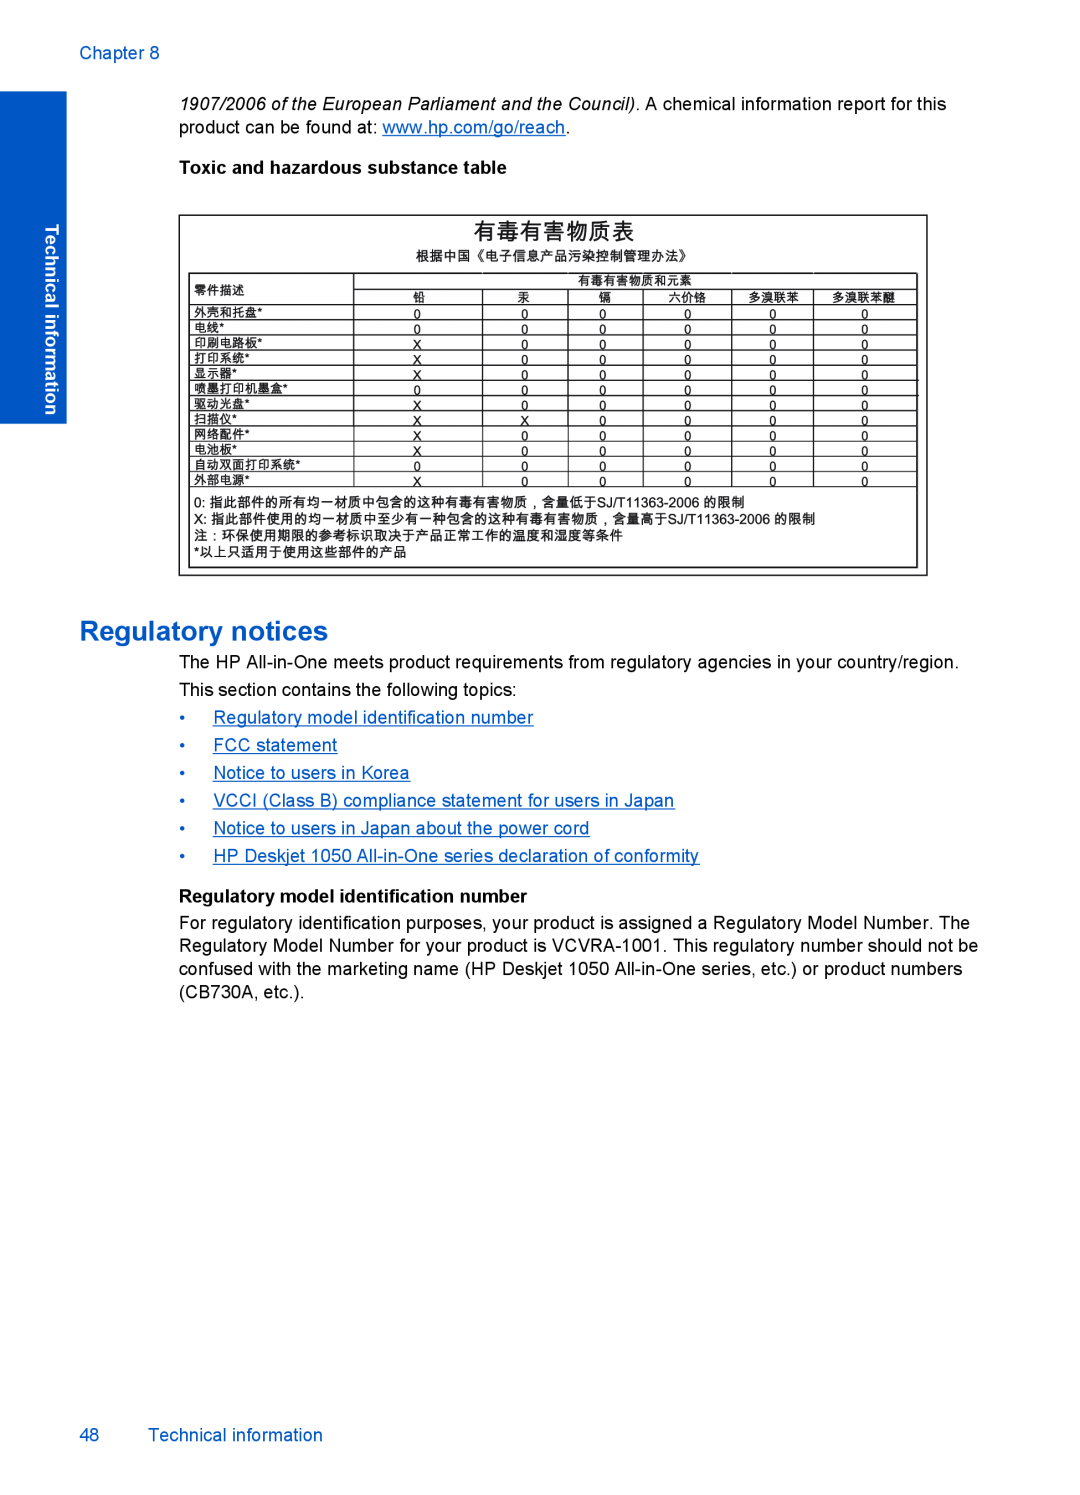 HP 1056 - J410a, 1051, 1050 - J410a Regulatory notices, Chapter, Toxic and hazardous substance table, Technical information 